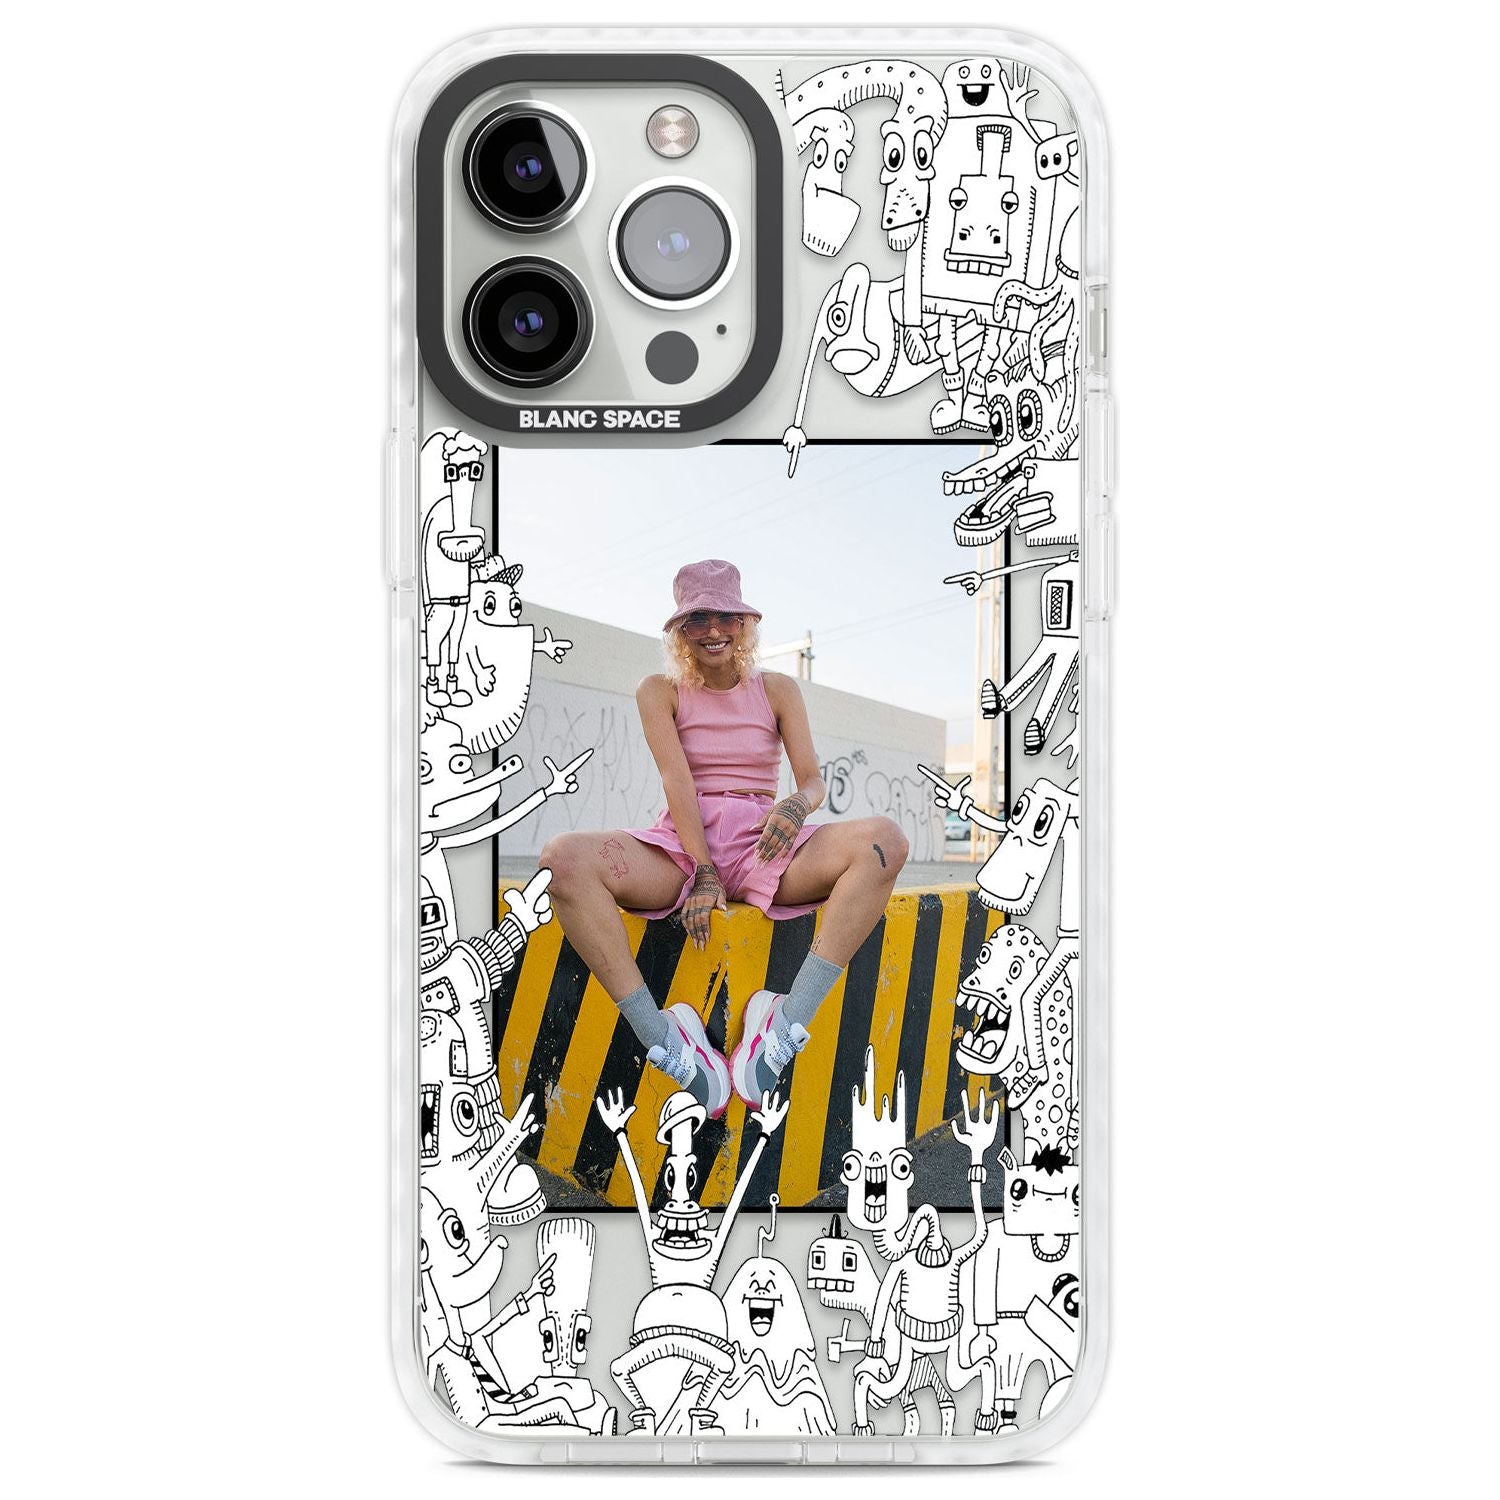 Personalised Look At This Photo Case Custom Phone Case iPhone 13 Pro Max / Impact Case,iPhone 14 Pro Max / Impact Case Blanc Space